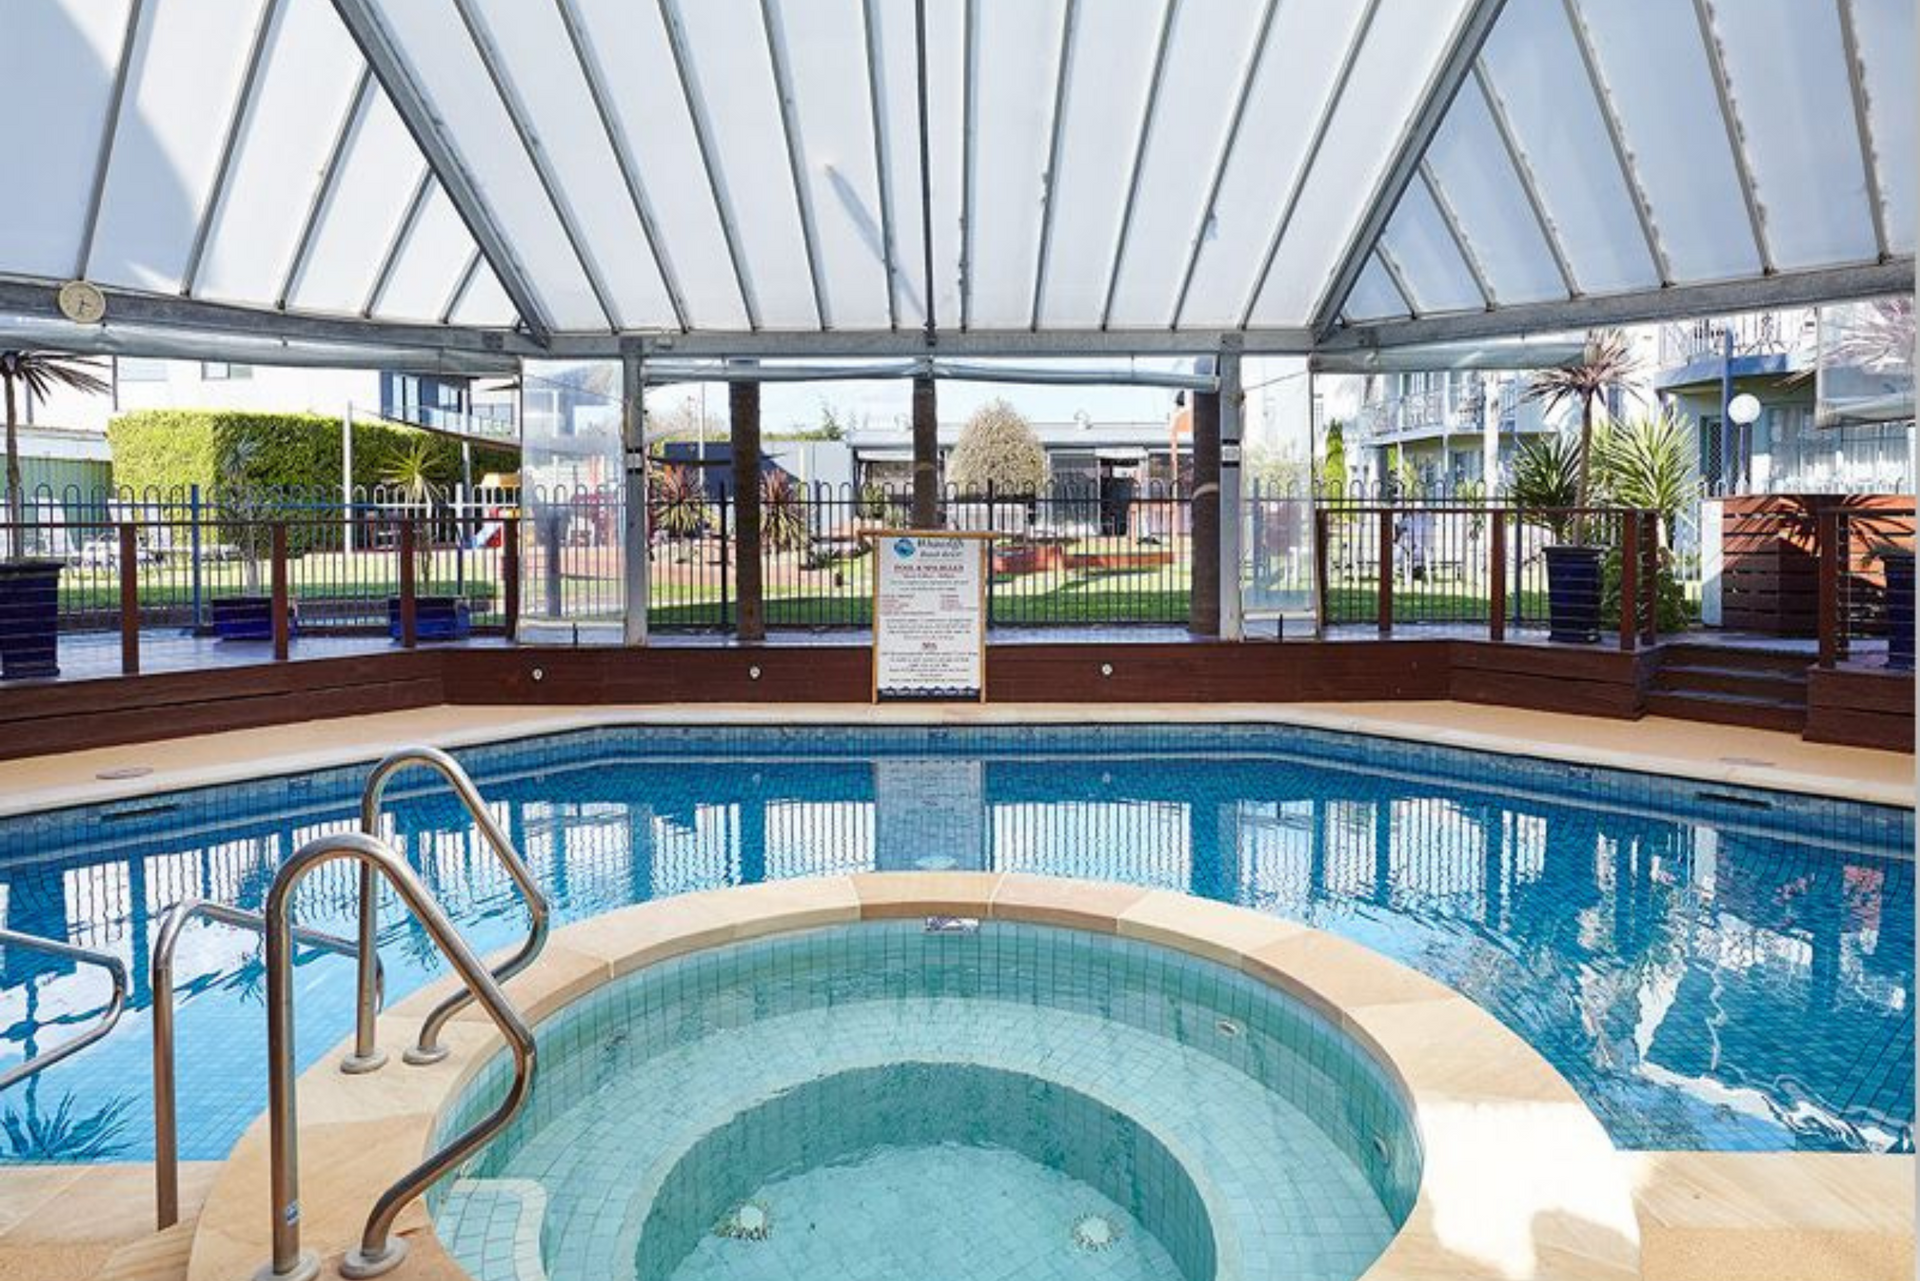 A large indoor swimming pool with a hot tub in the middle